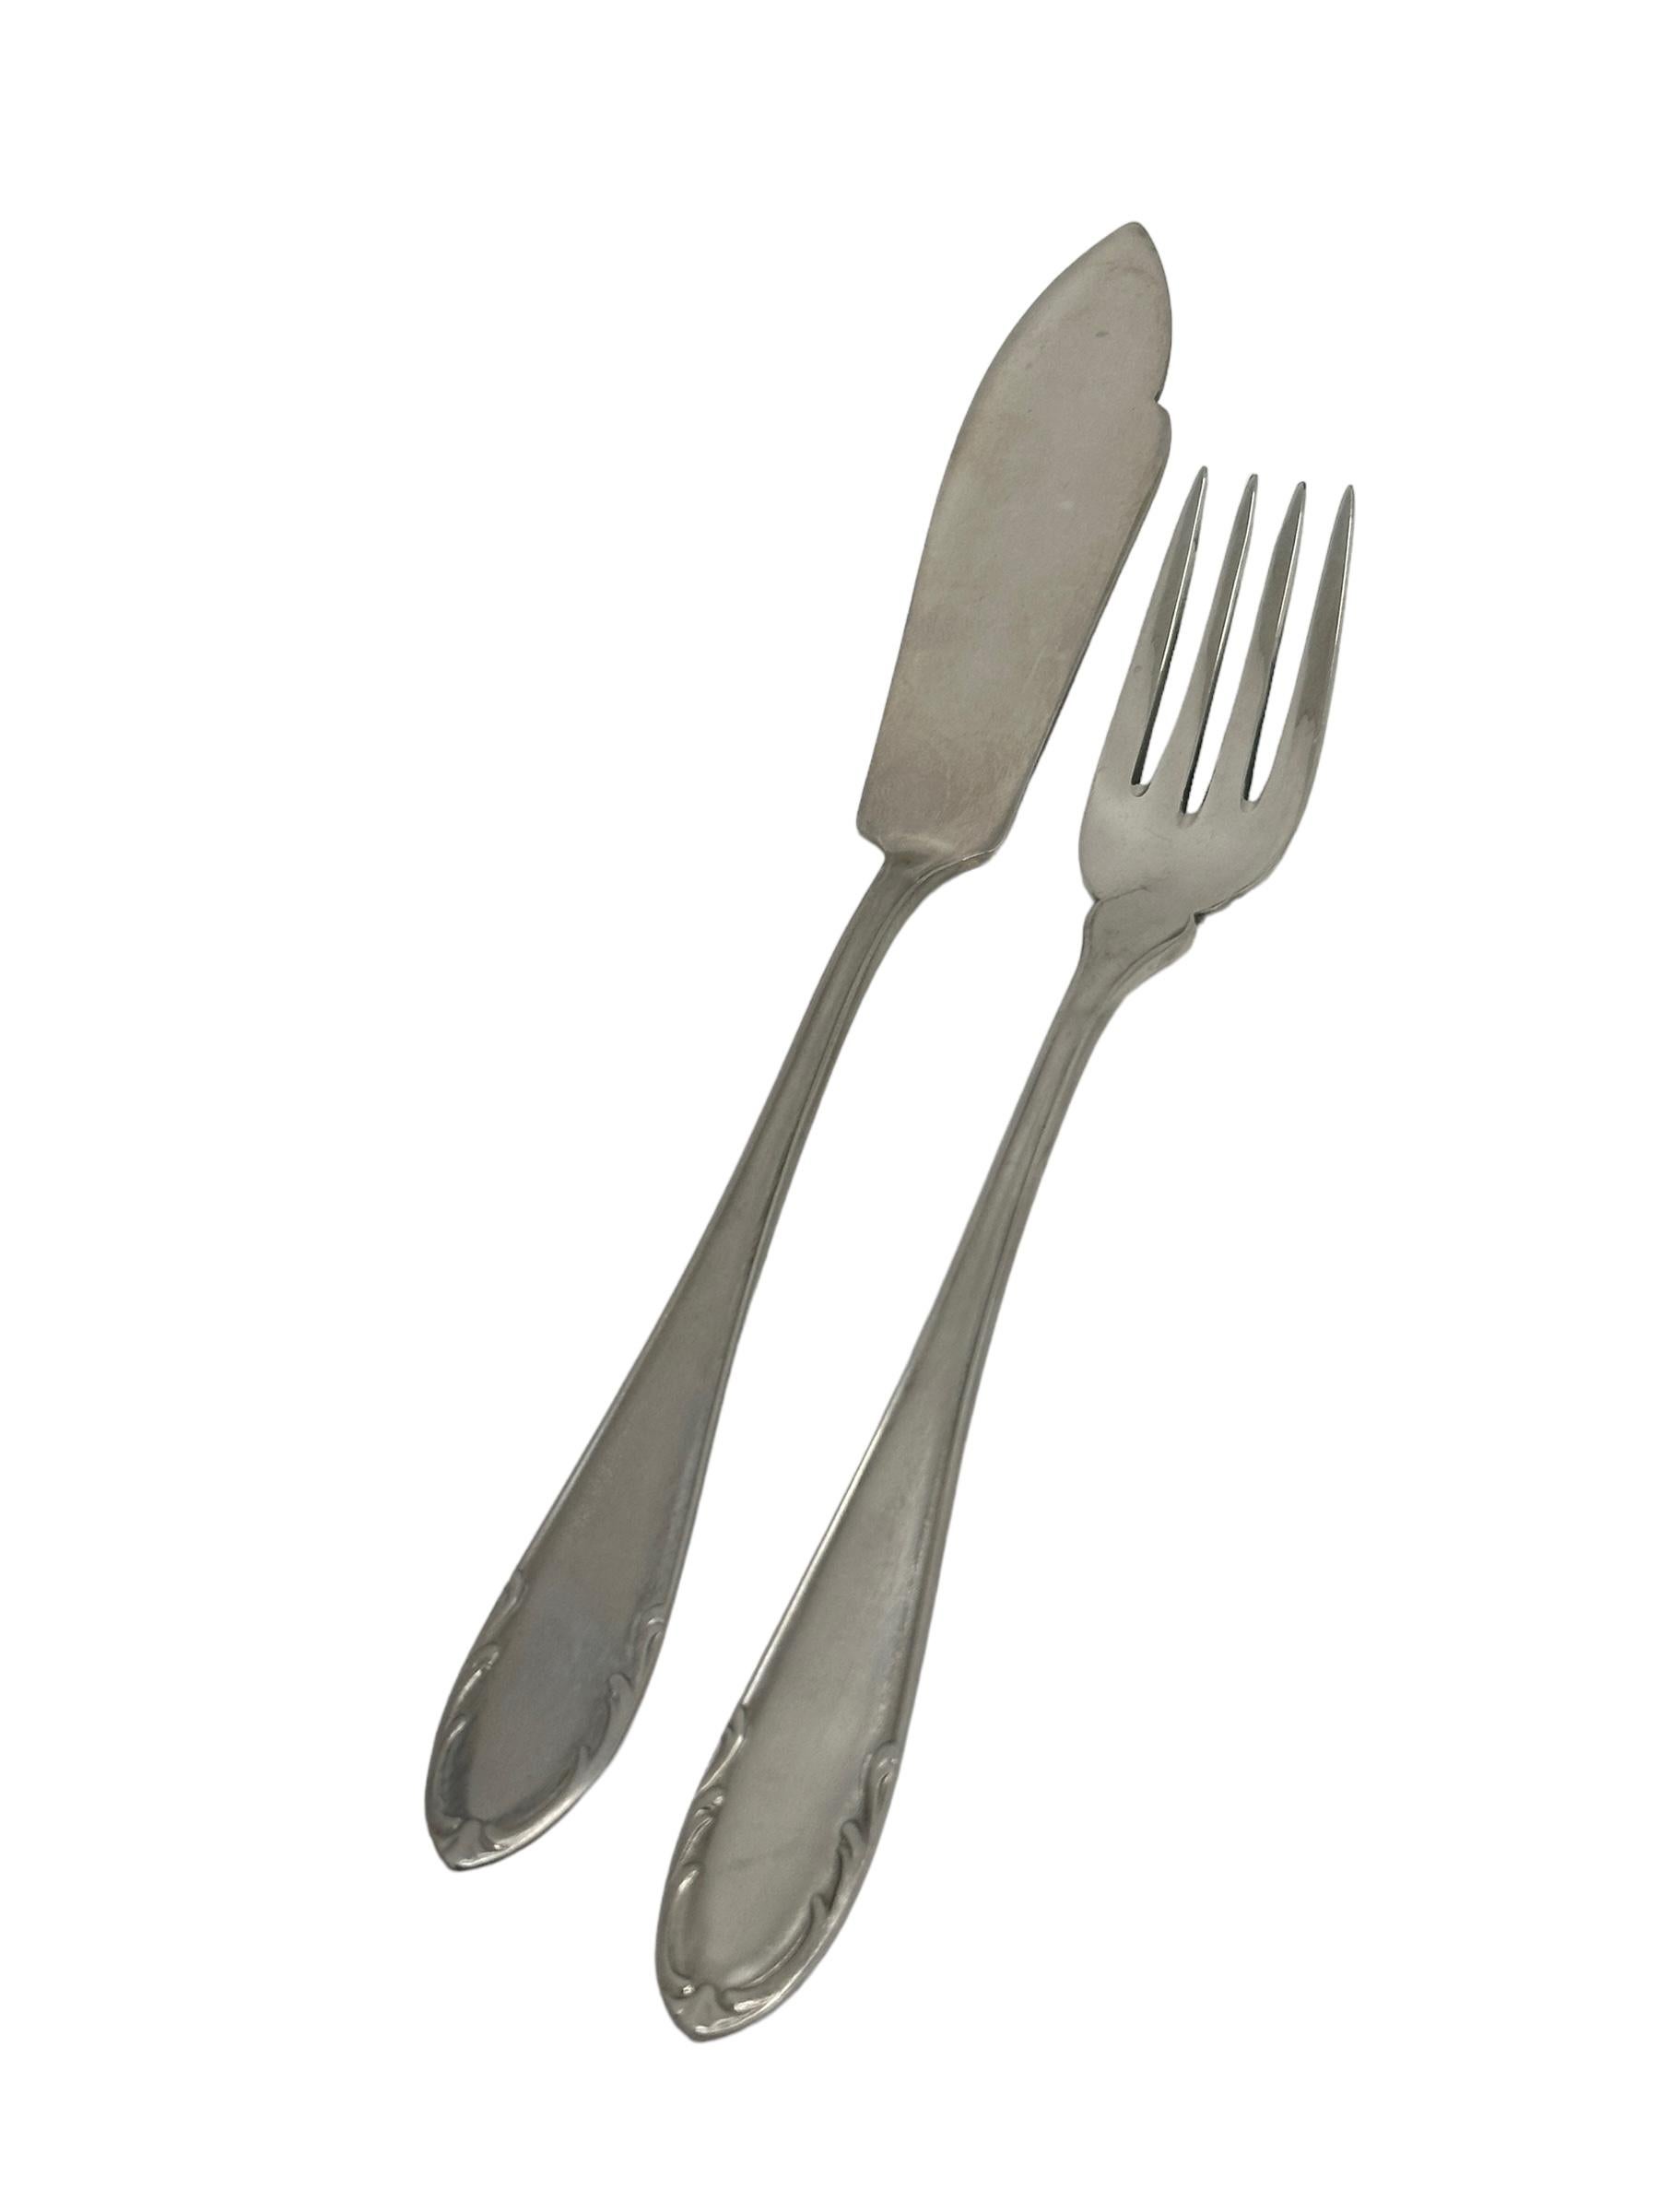 A beautiful Art Nouveau flatware set of 6 knife and 6 forks. A total of 12 pieces, made by Wellner in a beautiful Art Nouveau design. Made of chrome plate metal, it will make a nice addition to any table. Marked with the elephant mark like seen in